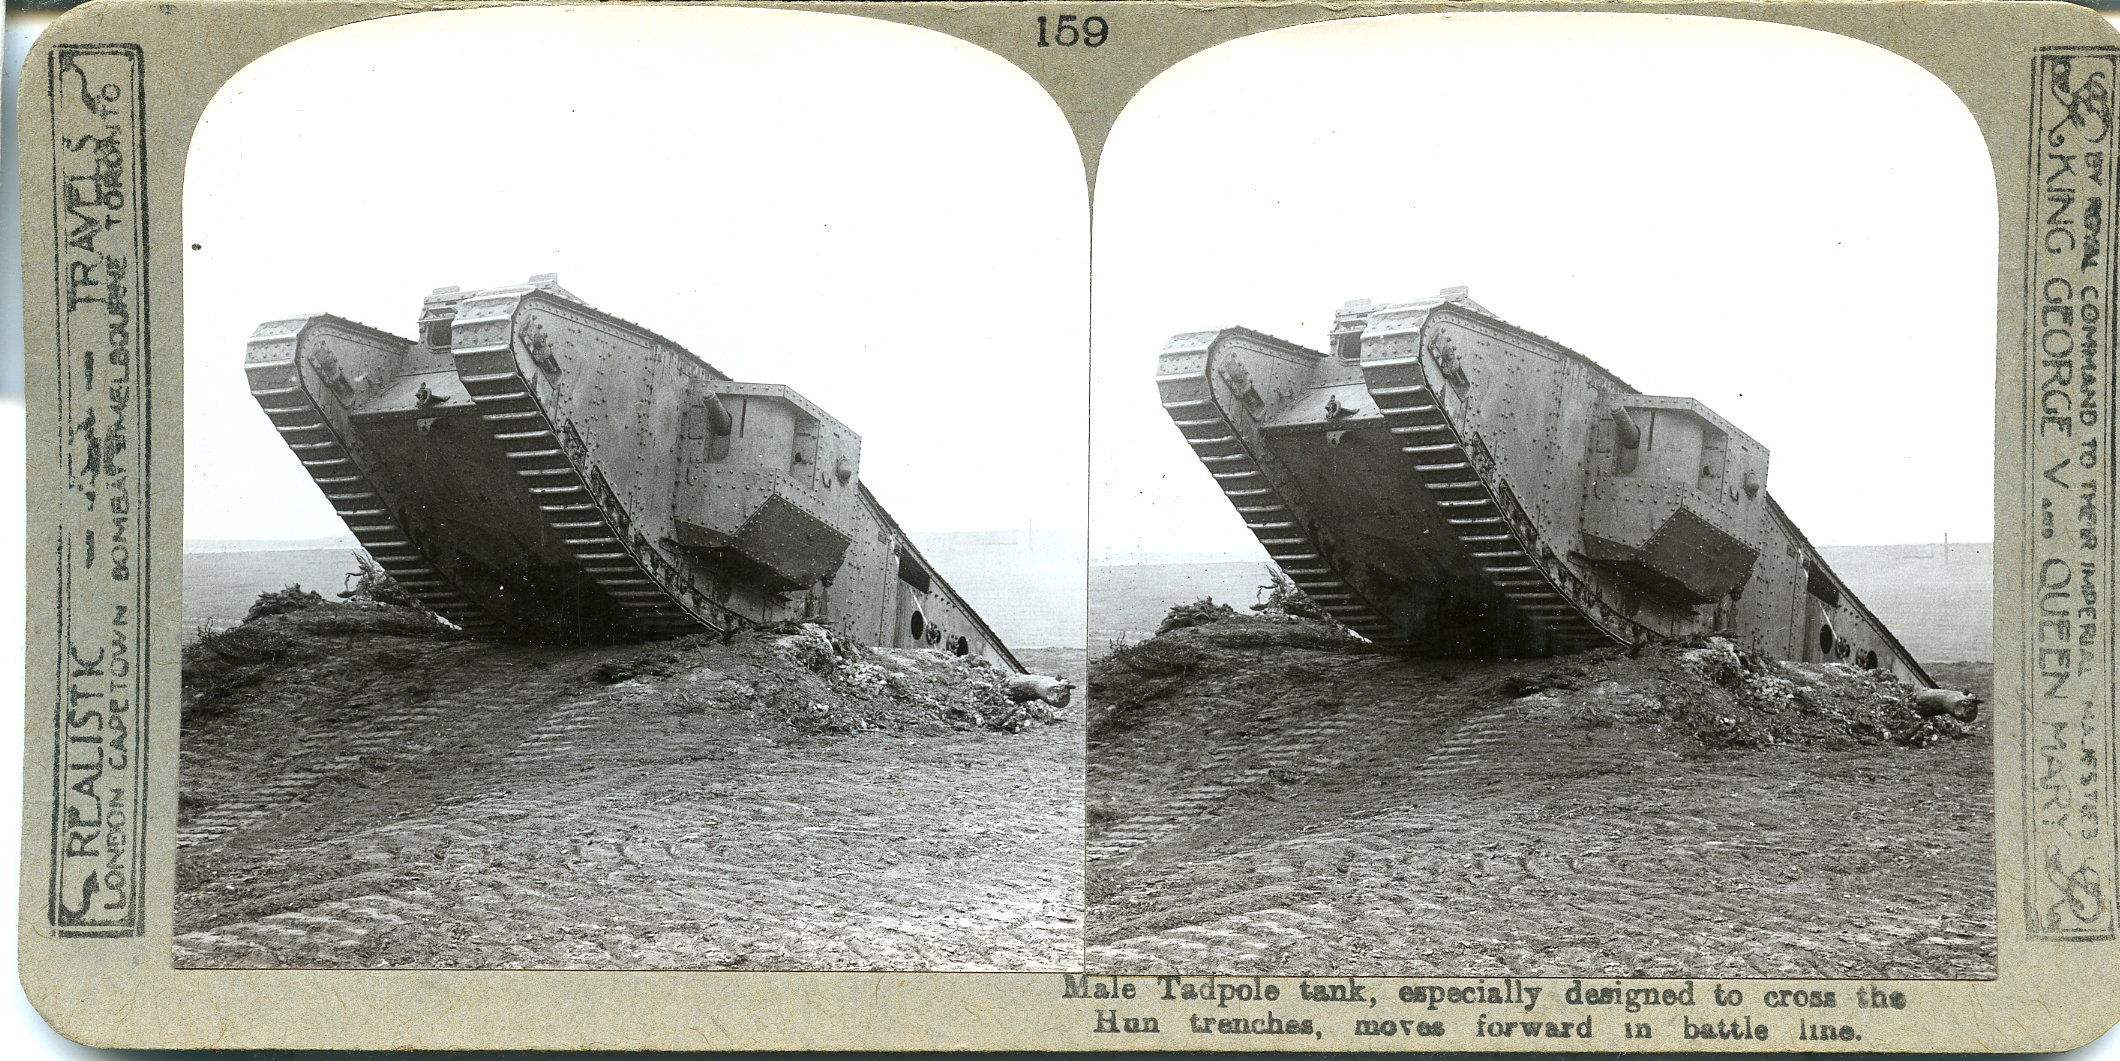 Male Tadpole tank, especially designed to cross the Hun trenches, moves forward in battle line